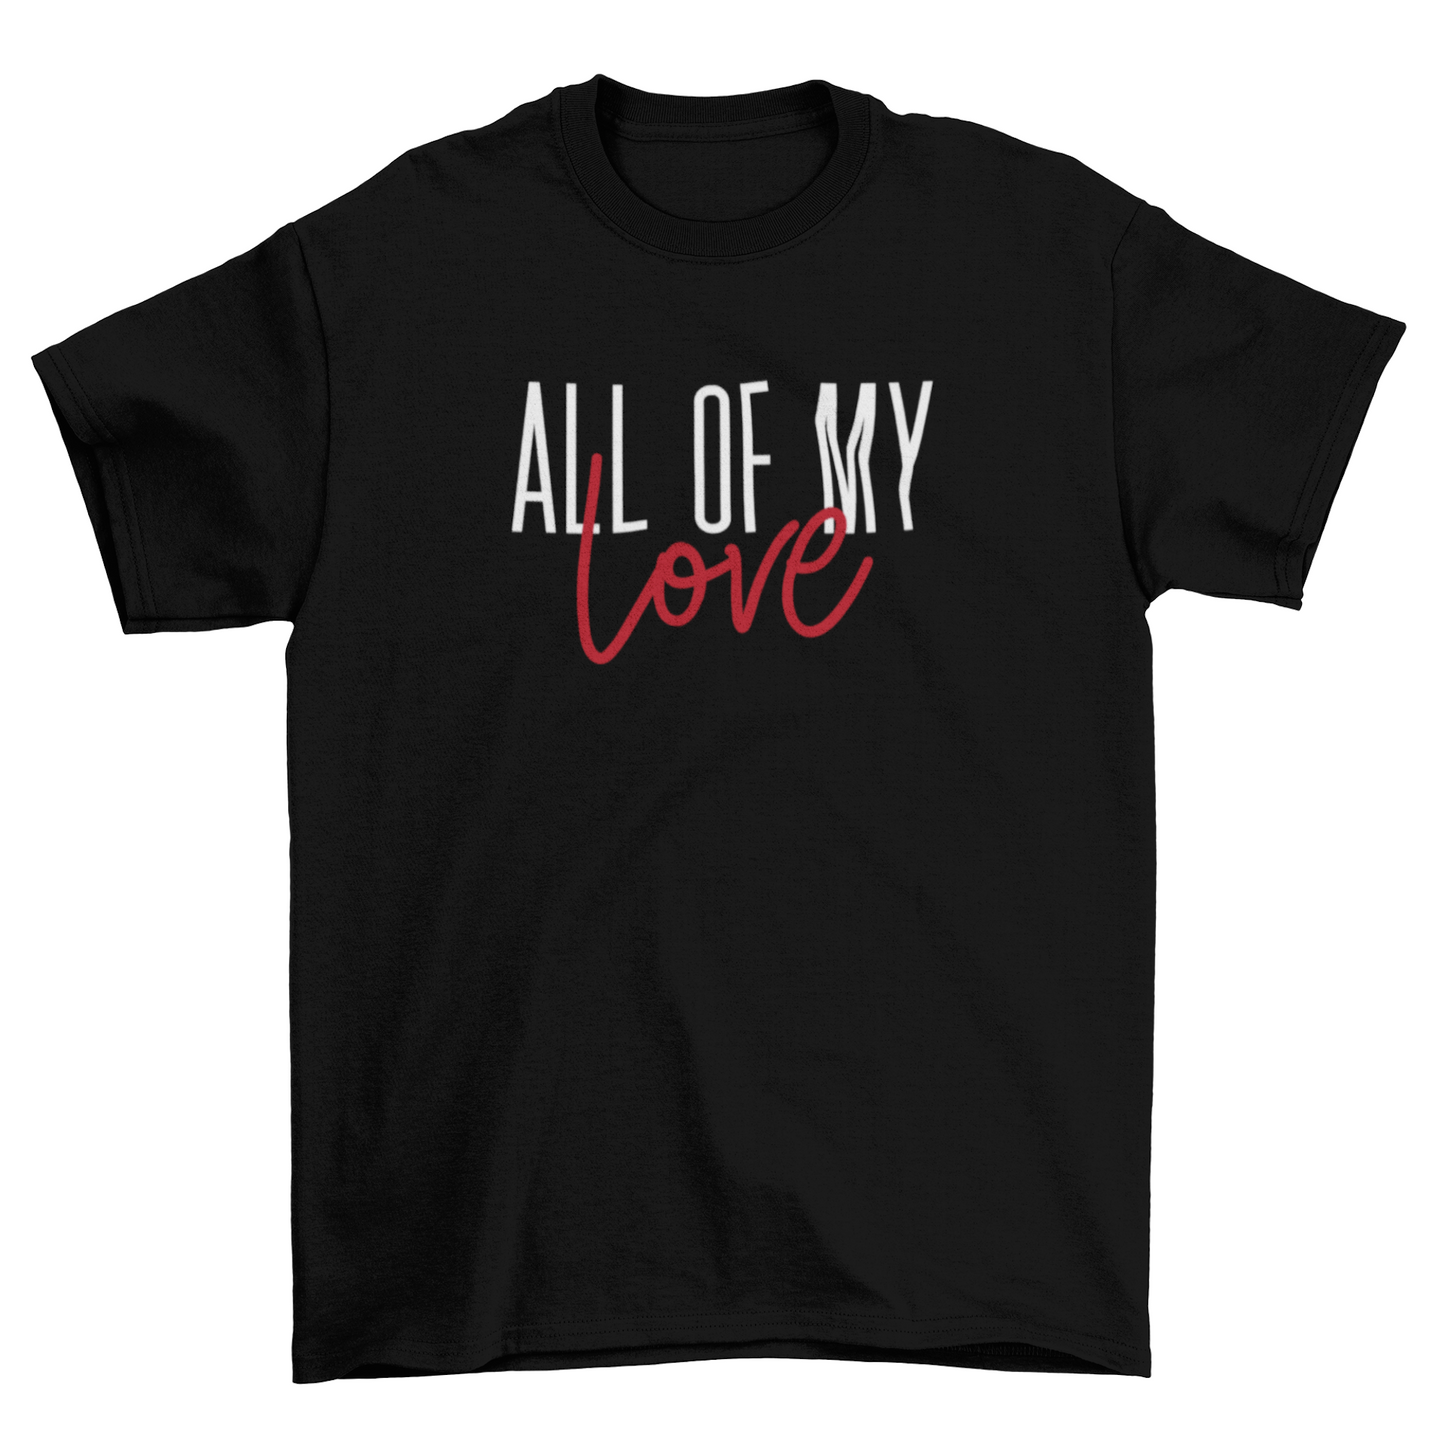 All of My Love (AOML) - Multiple Garment Colors